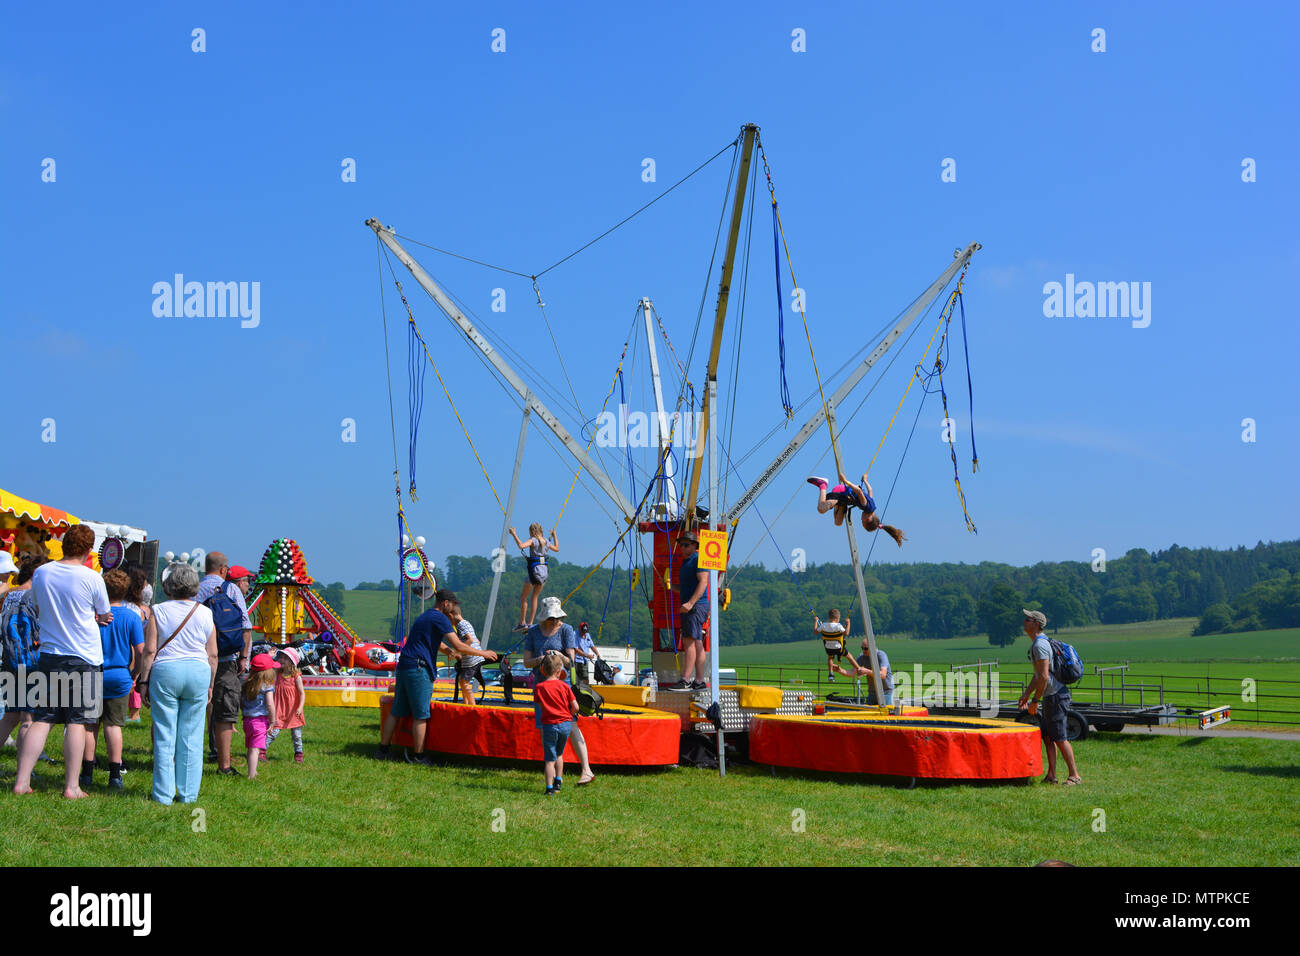 Bungee jumping  at the annual Sherborne Castle Country Fair, Sherborne, Dorset, England. Stock Photo